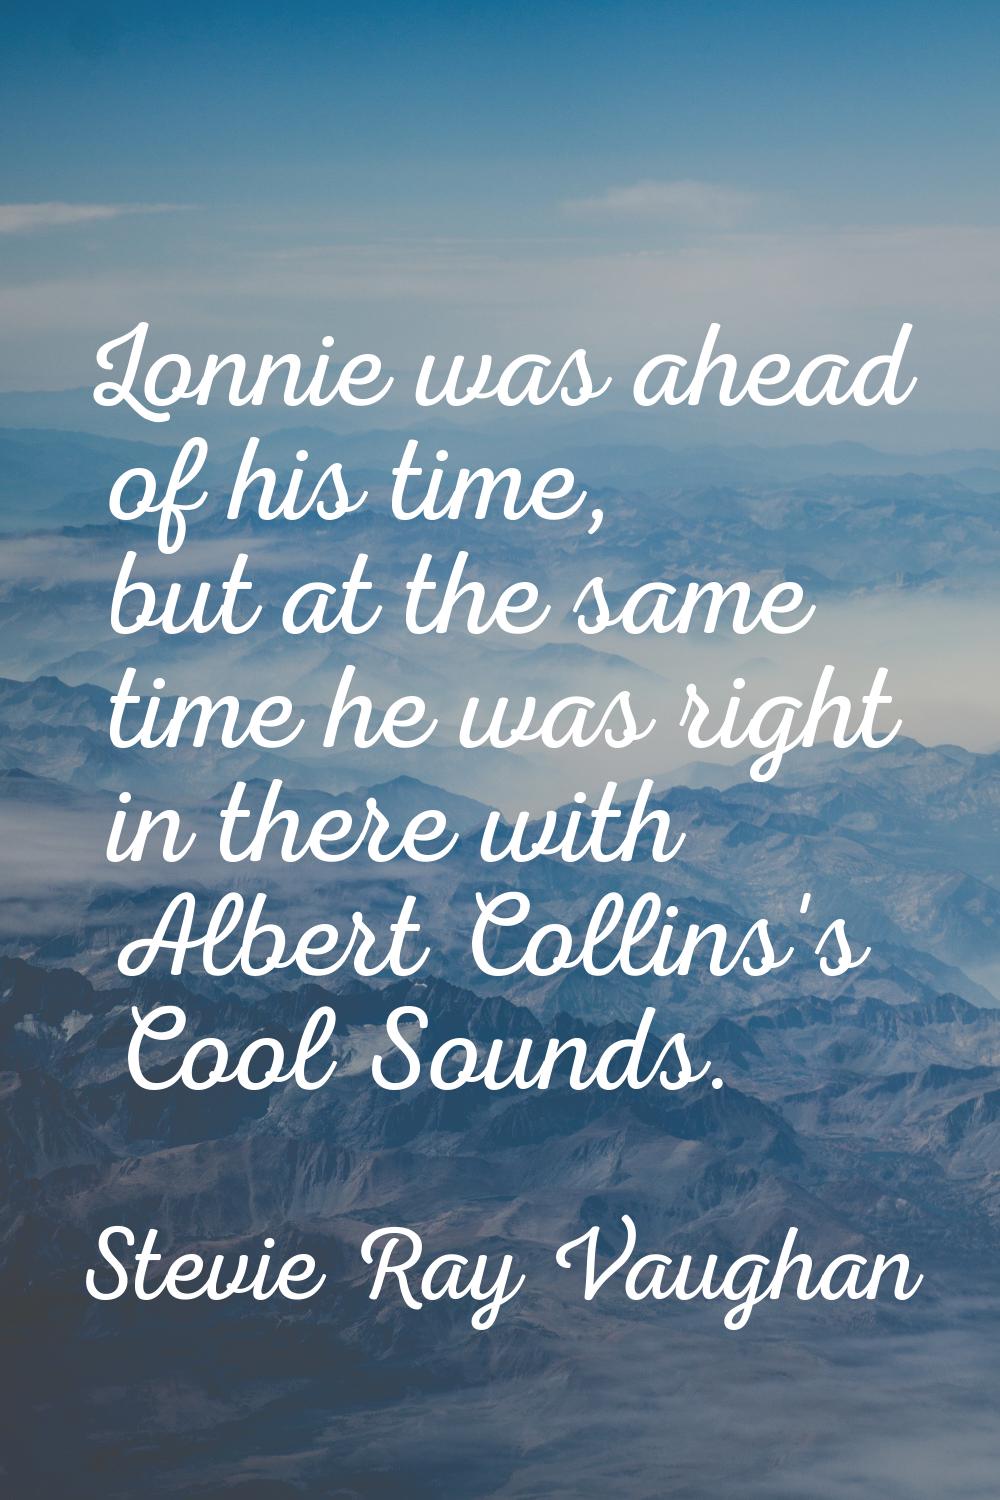 Lonnie was ahead of his time, but at the same time he was right in there with Albert Collins's Cool